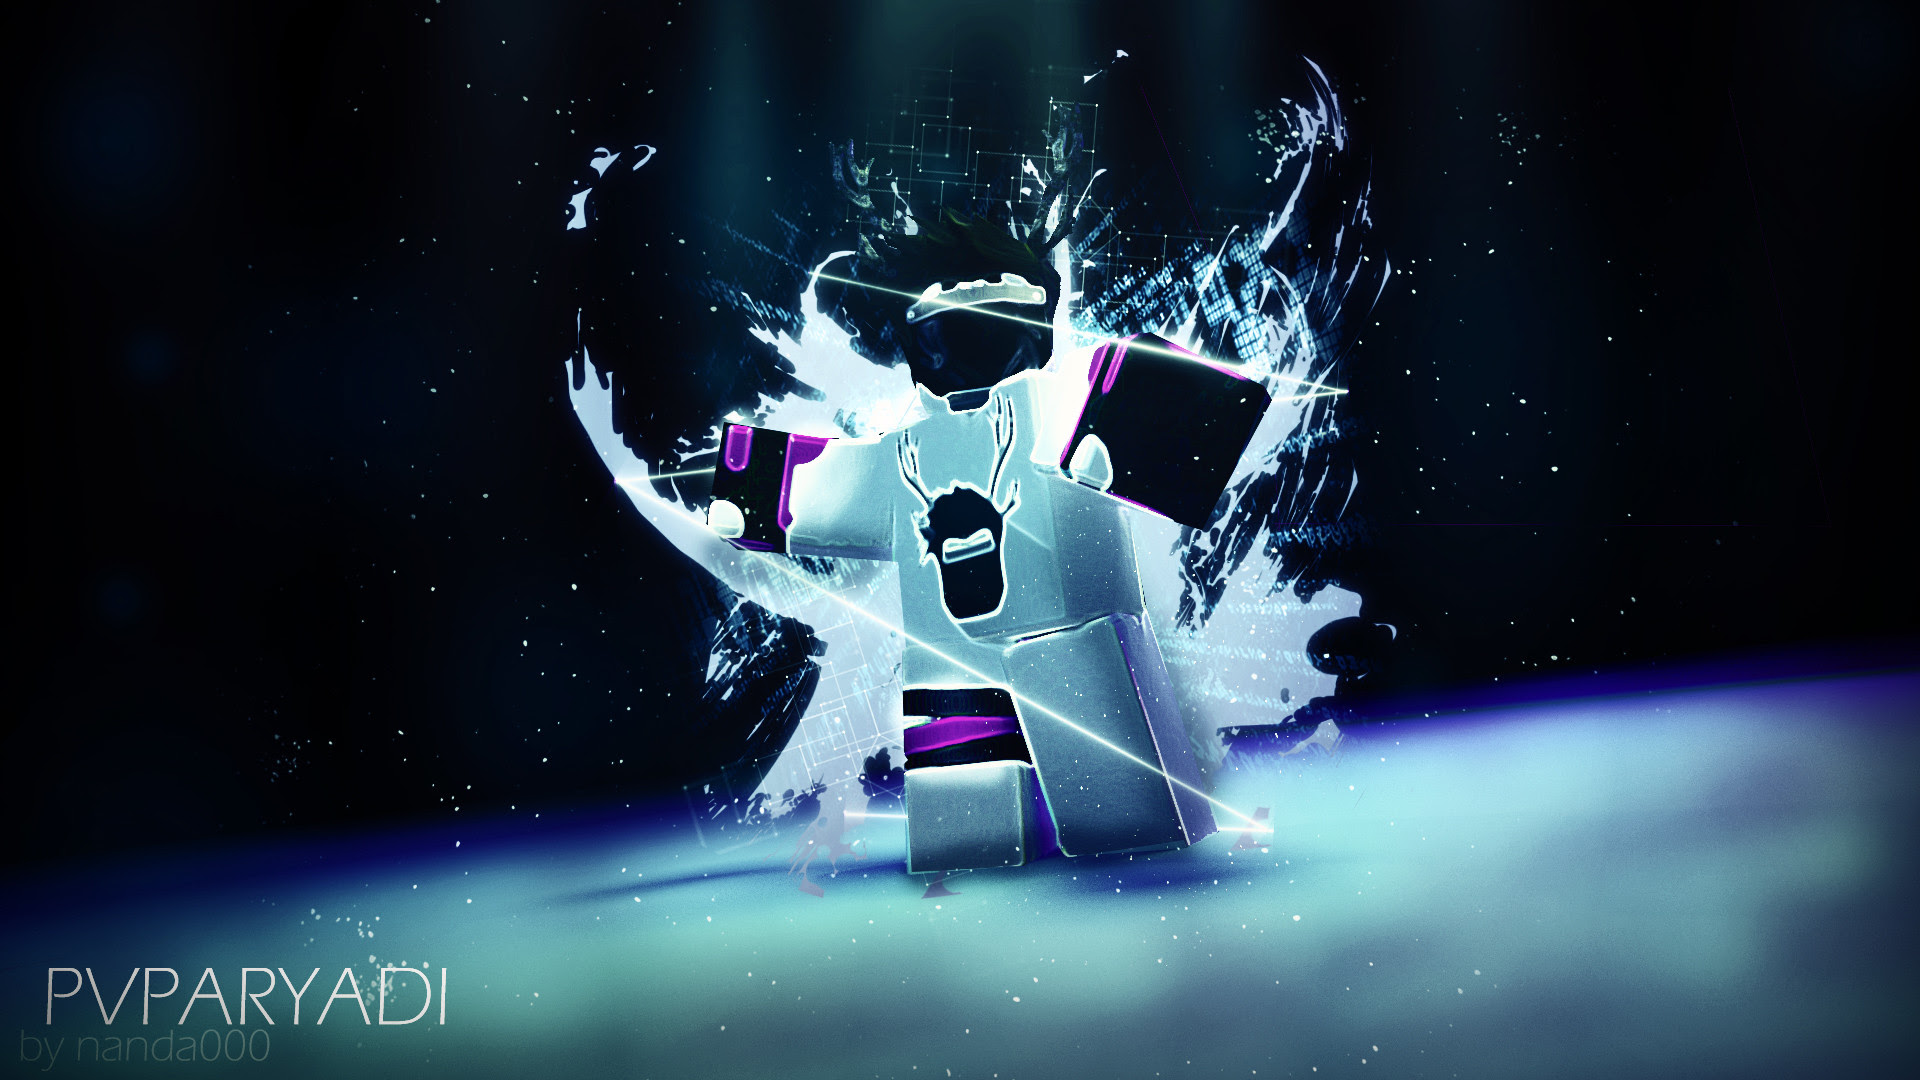 Roblox Background 2560x1440 - coolest roblox wallpapers